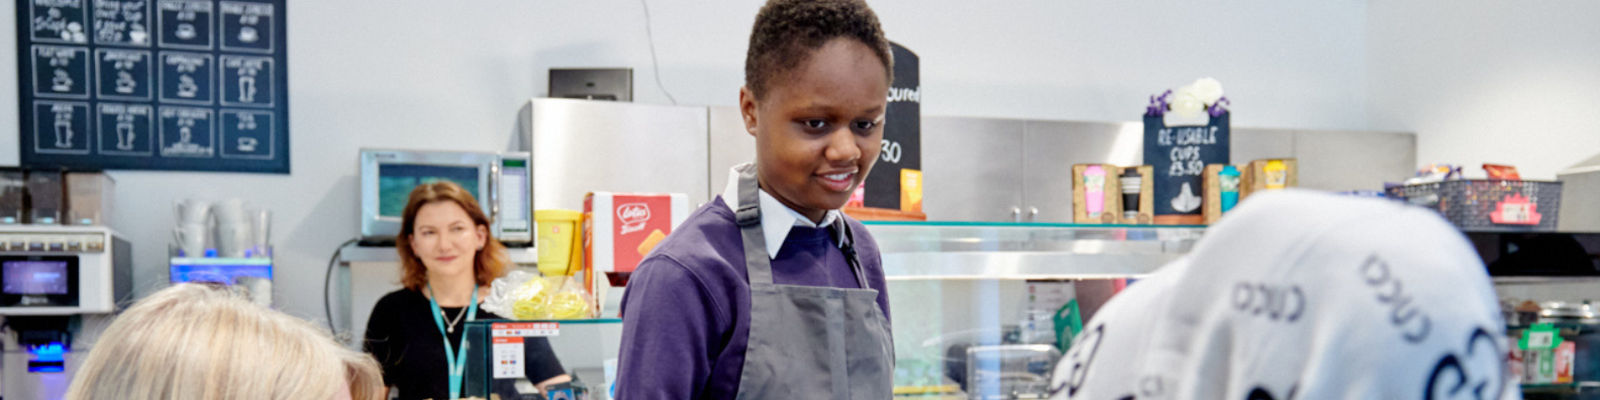 A young person serving drinks in the school cafe to 2 women sat down. 